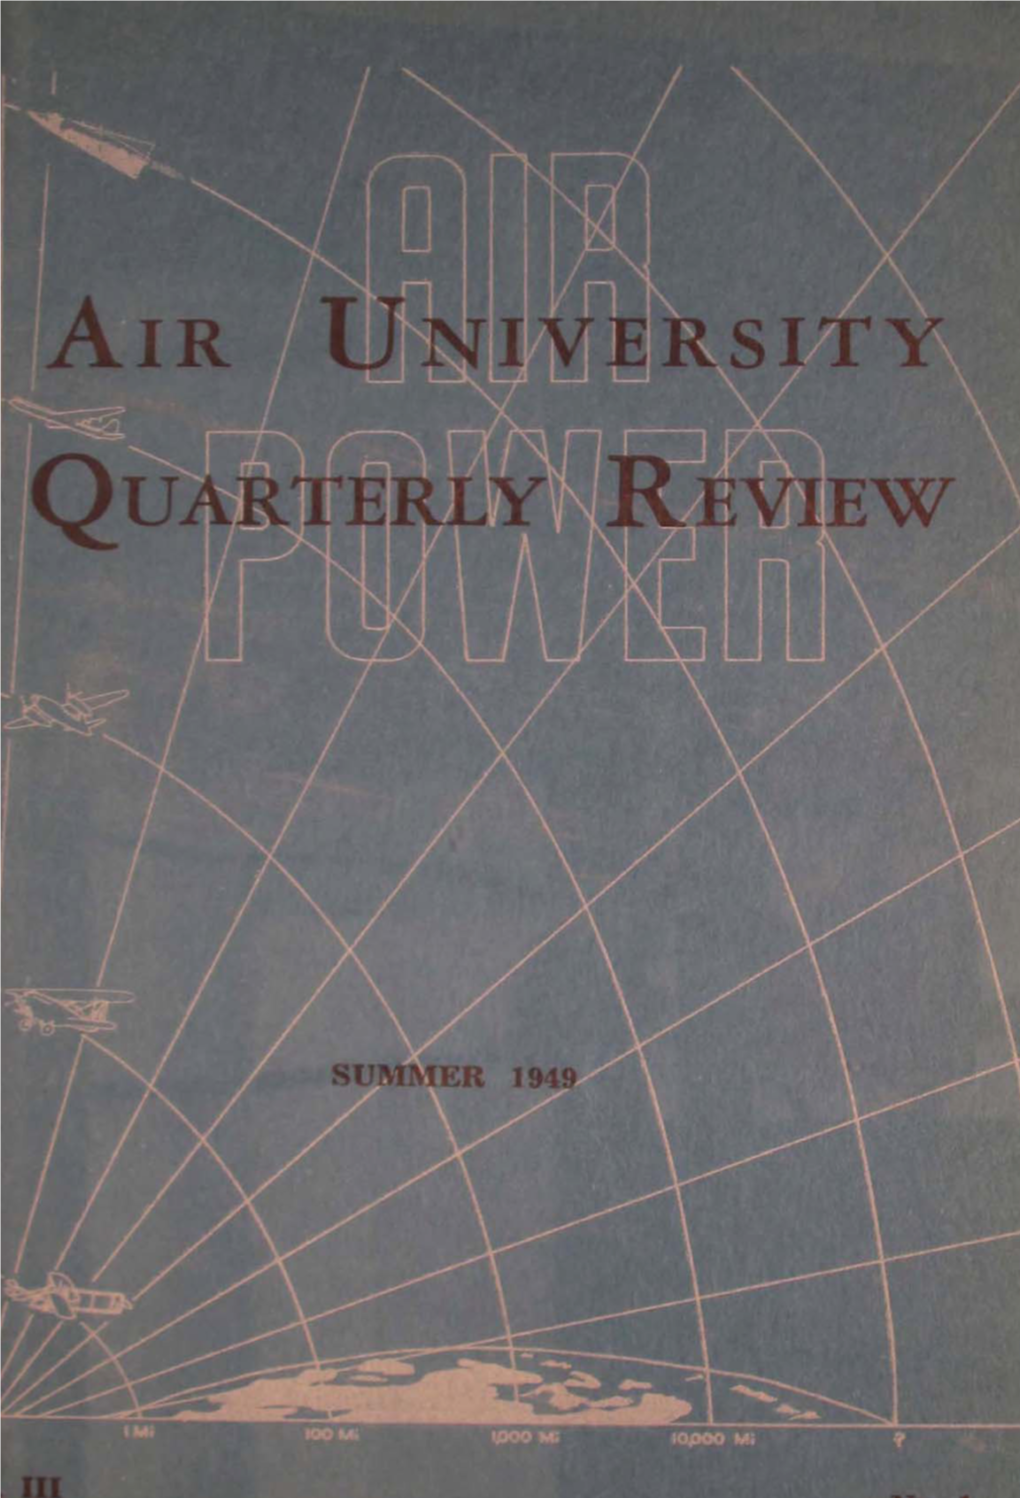 Air University Quarterly Review: Summer 1949 Volume III, Number 1